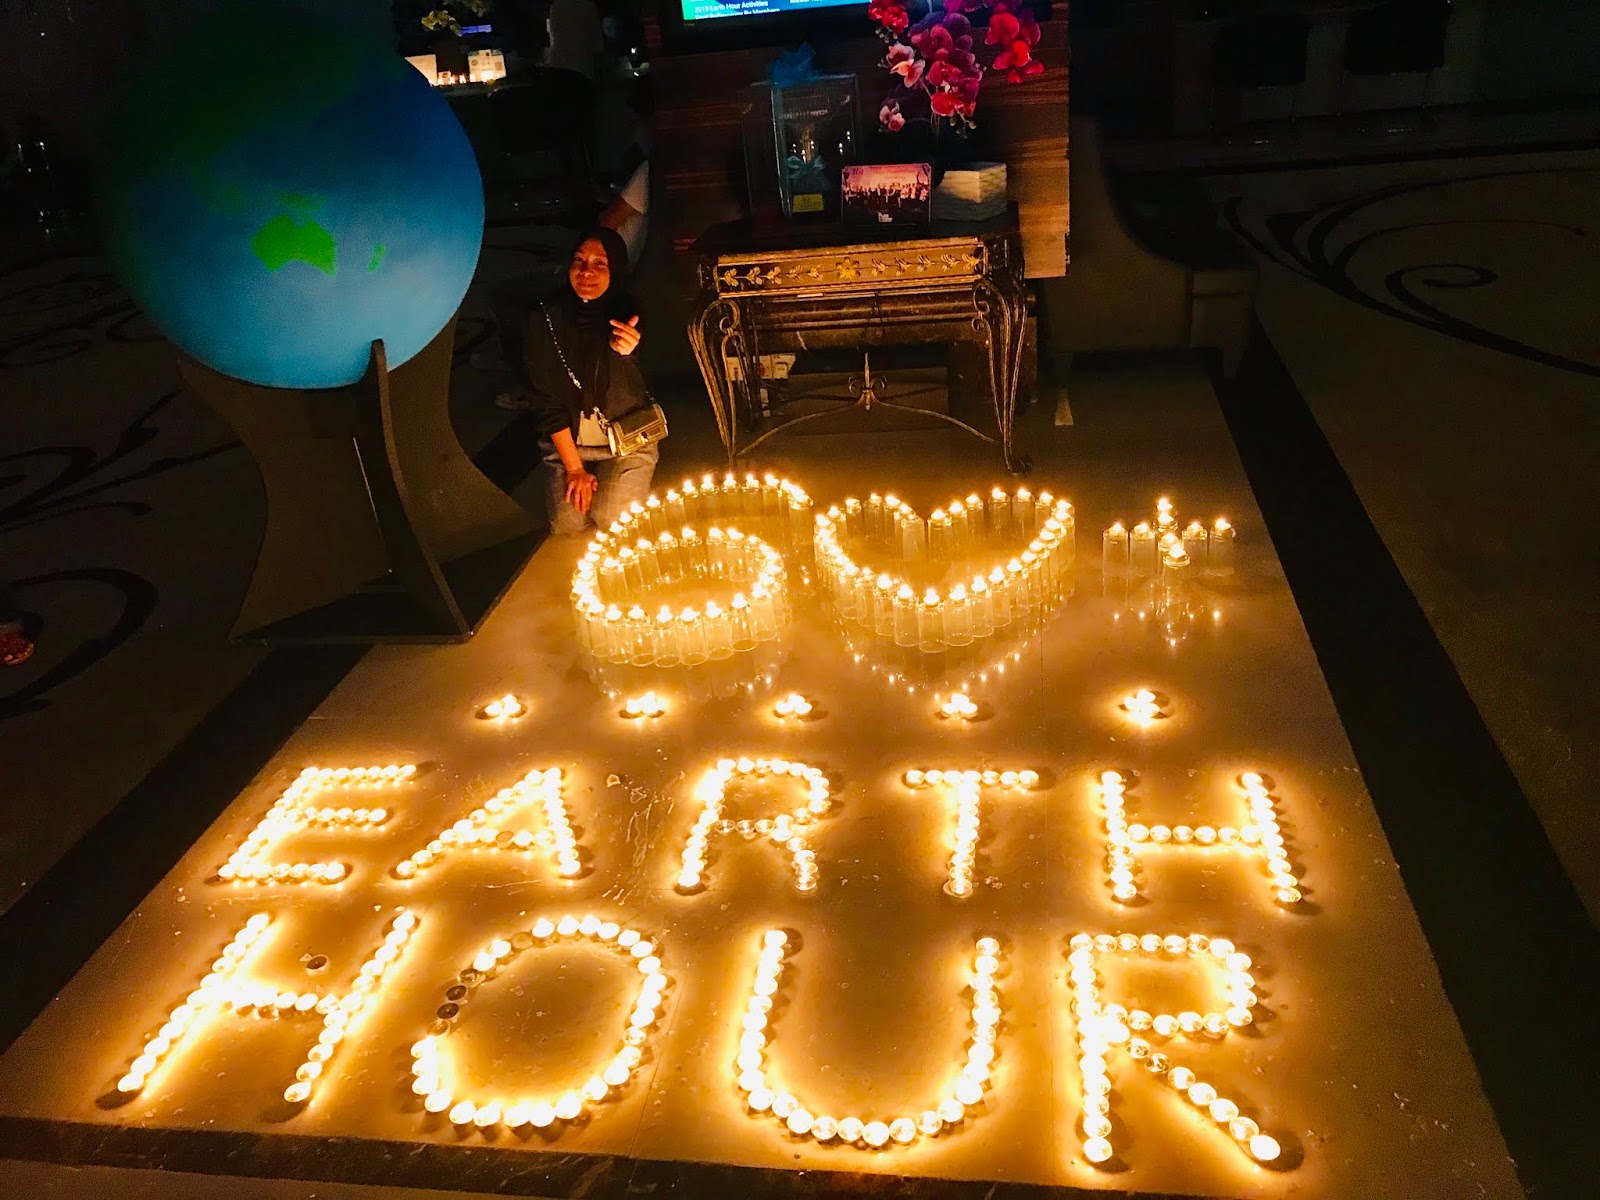 2 Chains of Promenade Hotels Went Dark in Support of Earth Hour